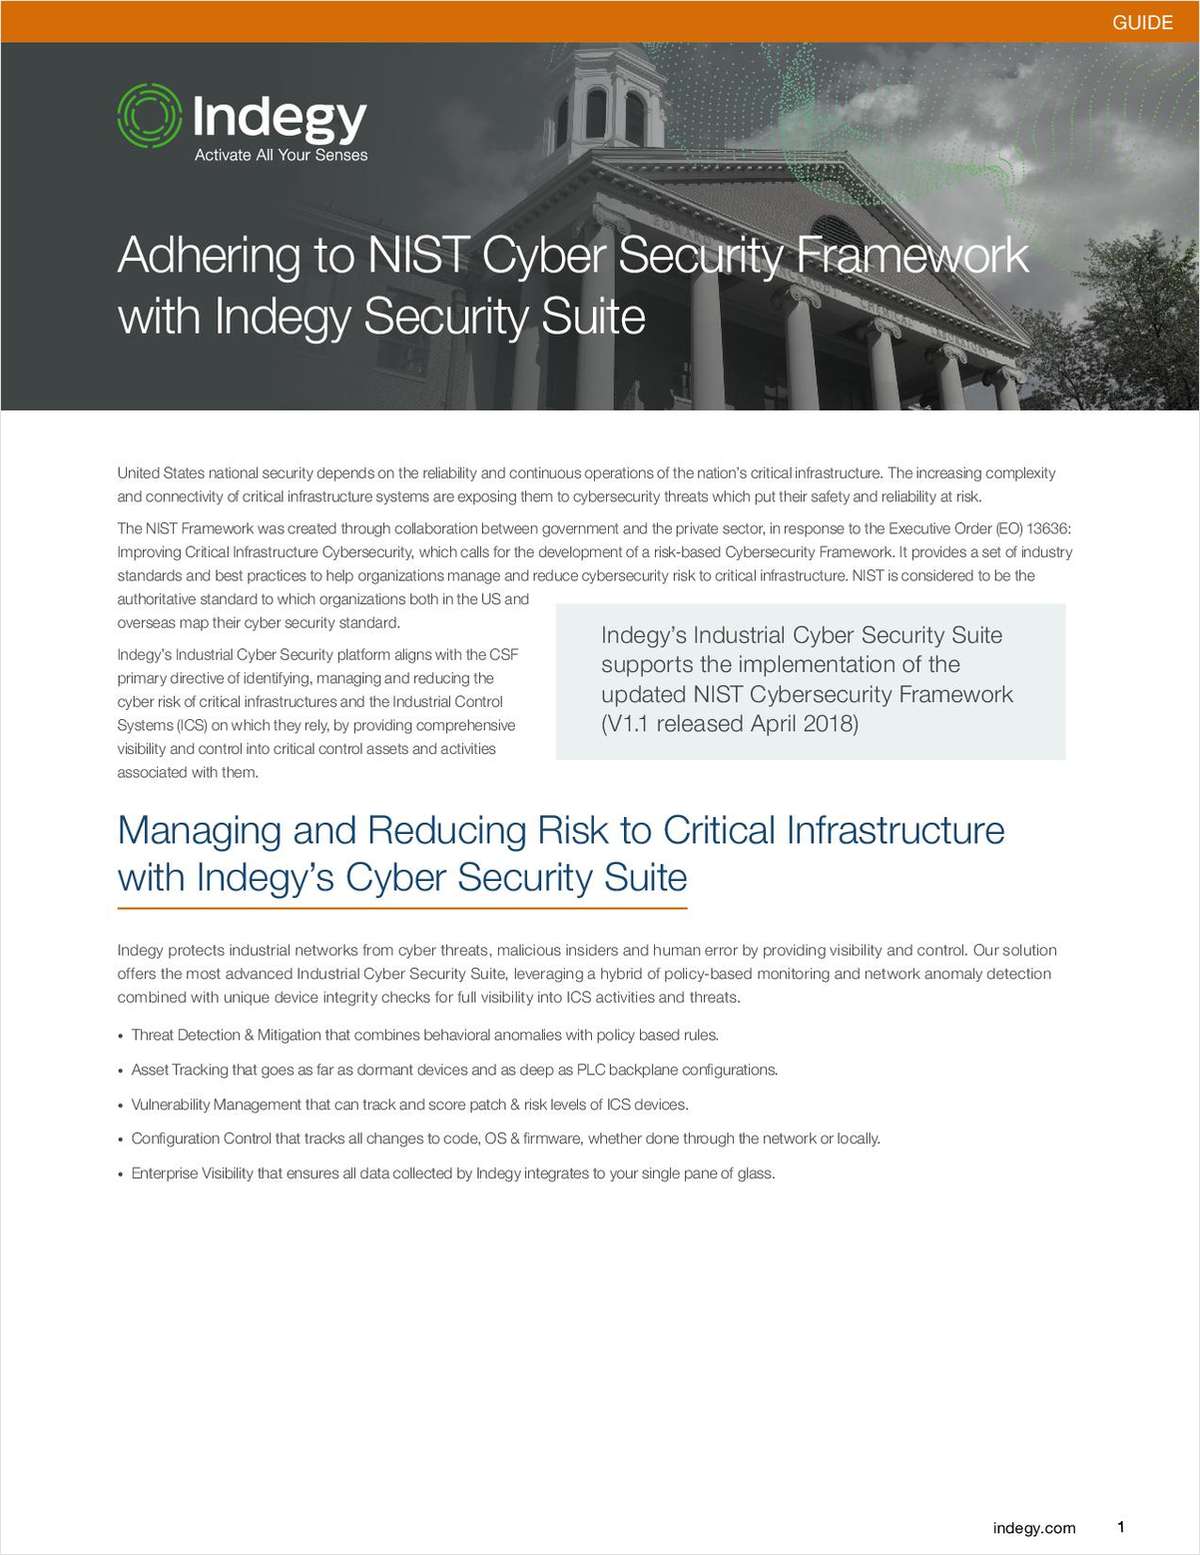 Adhering to the NIST Cybersecurity Framework